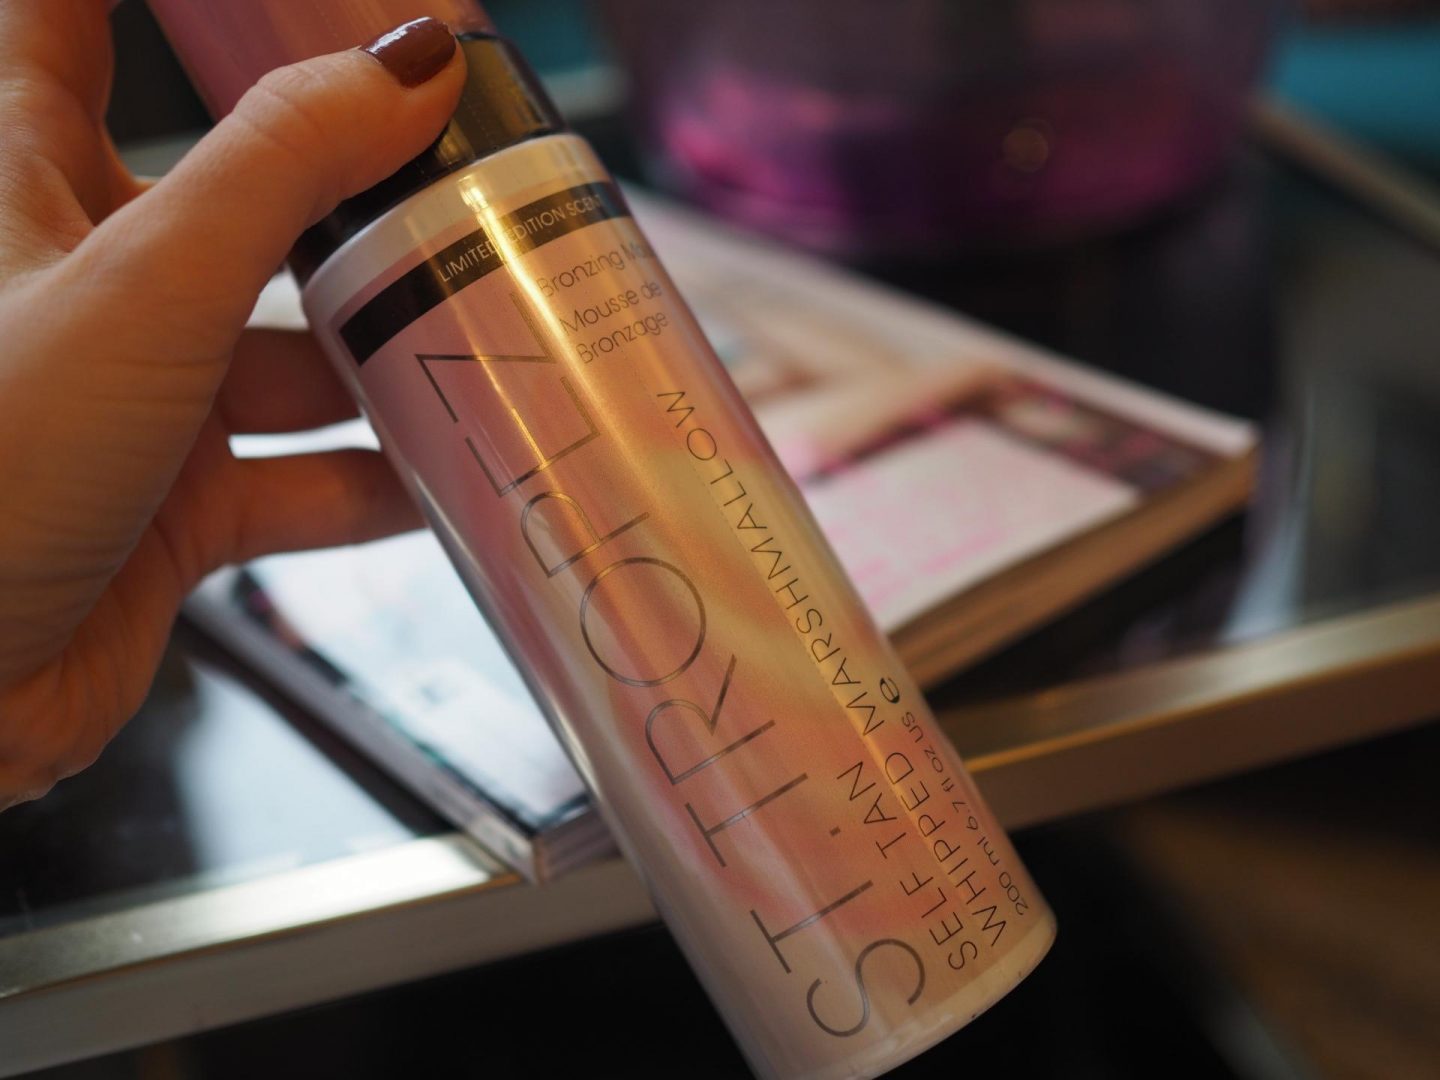  St. Tropez Bronzing Mousse In Whipped Marshmallow